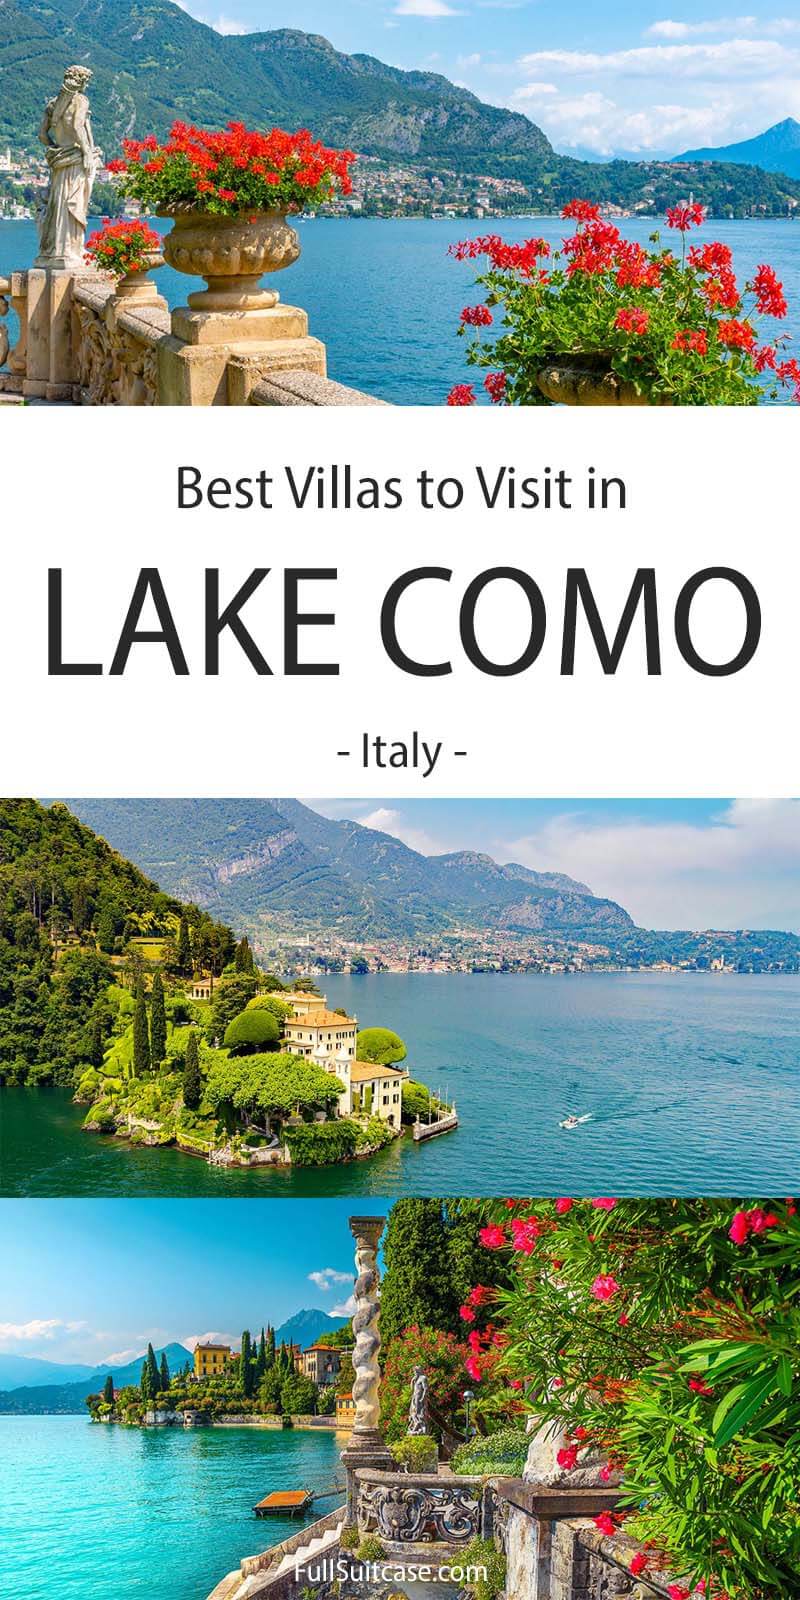 Most beautiful gardens and villas to visit in Lake Como in Italy